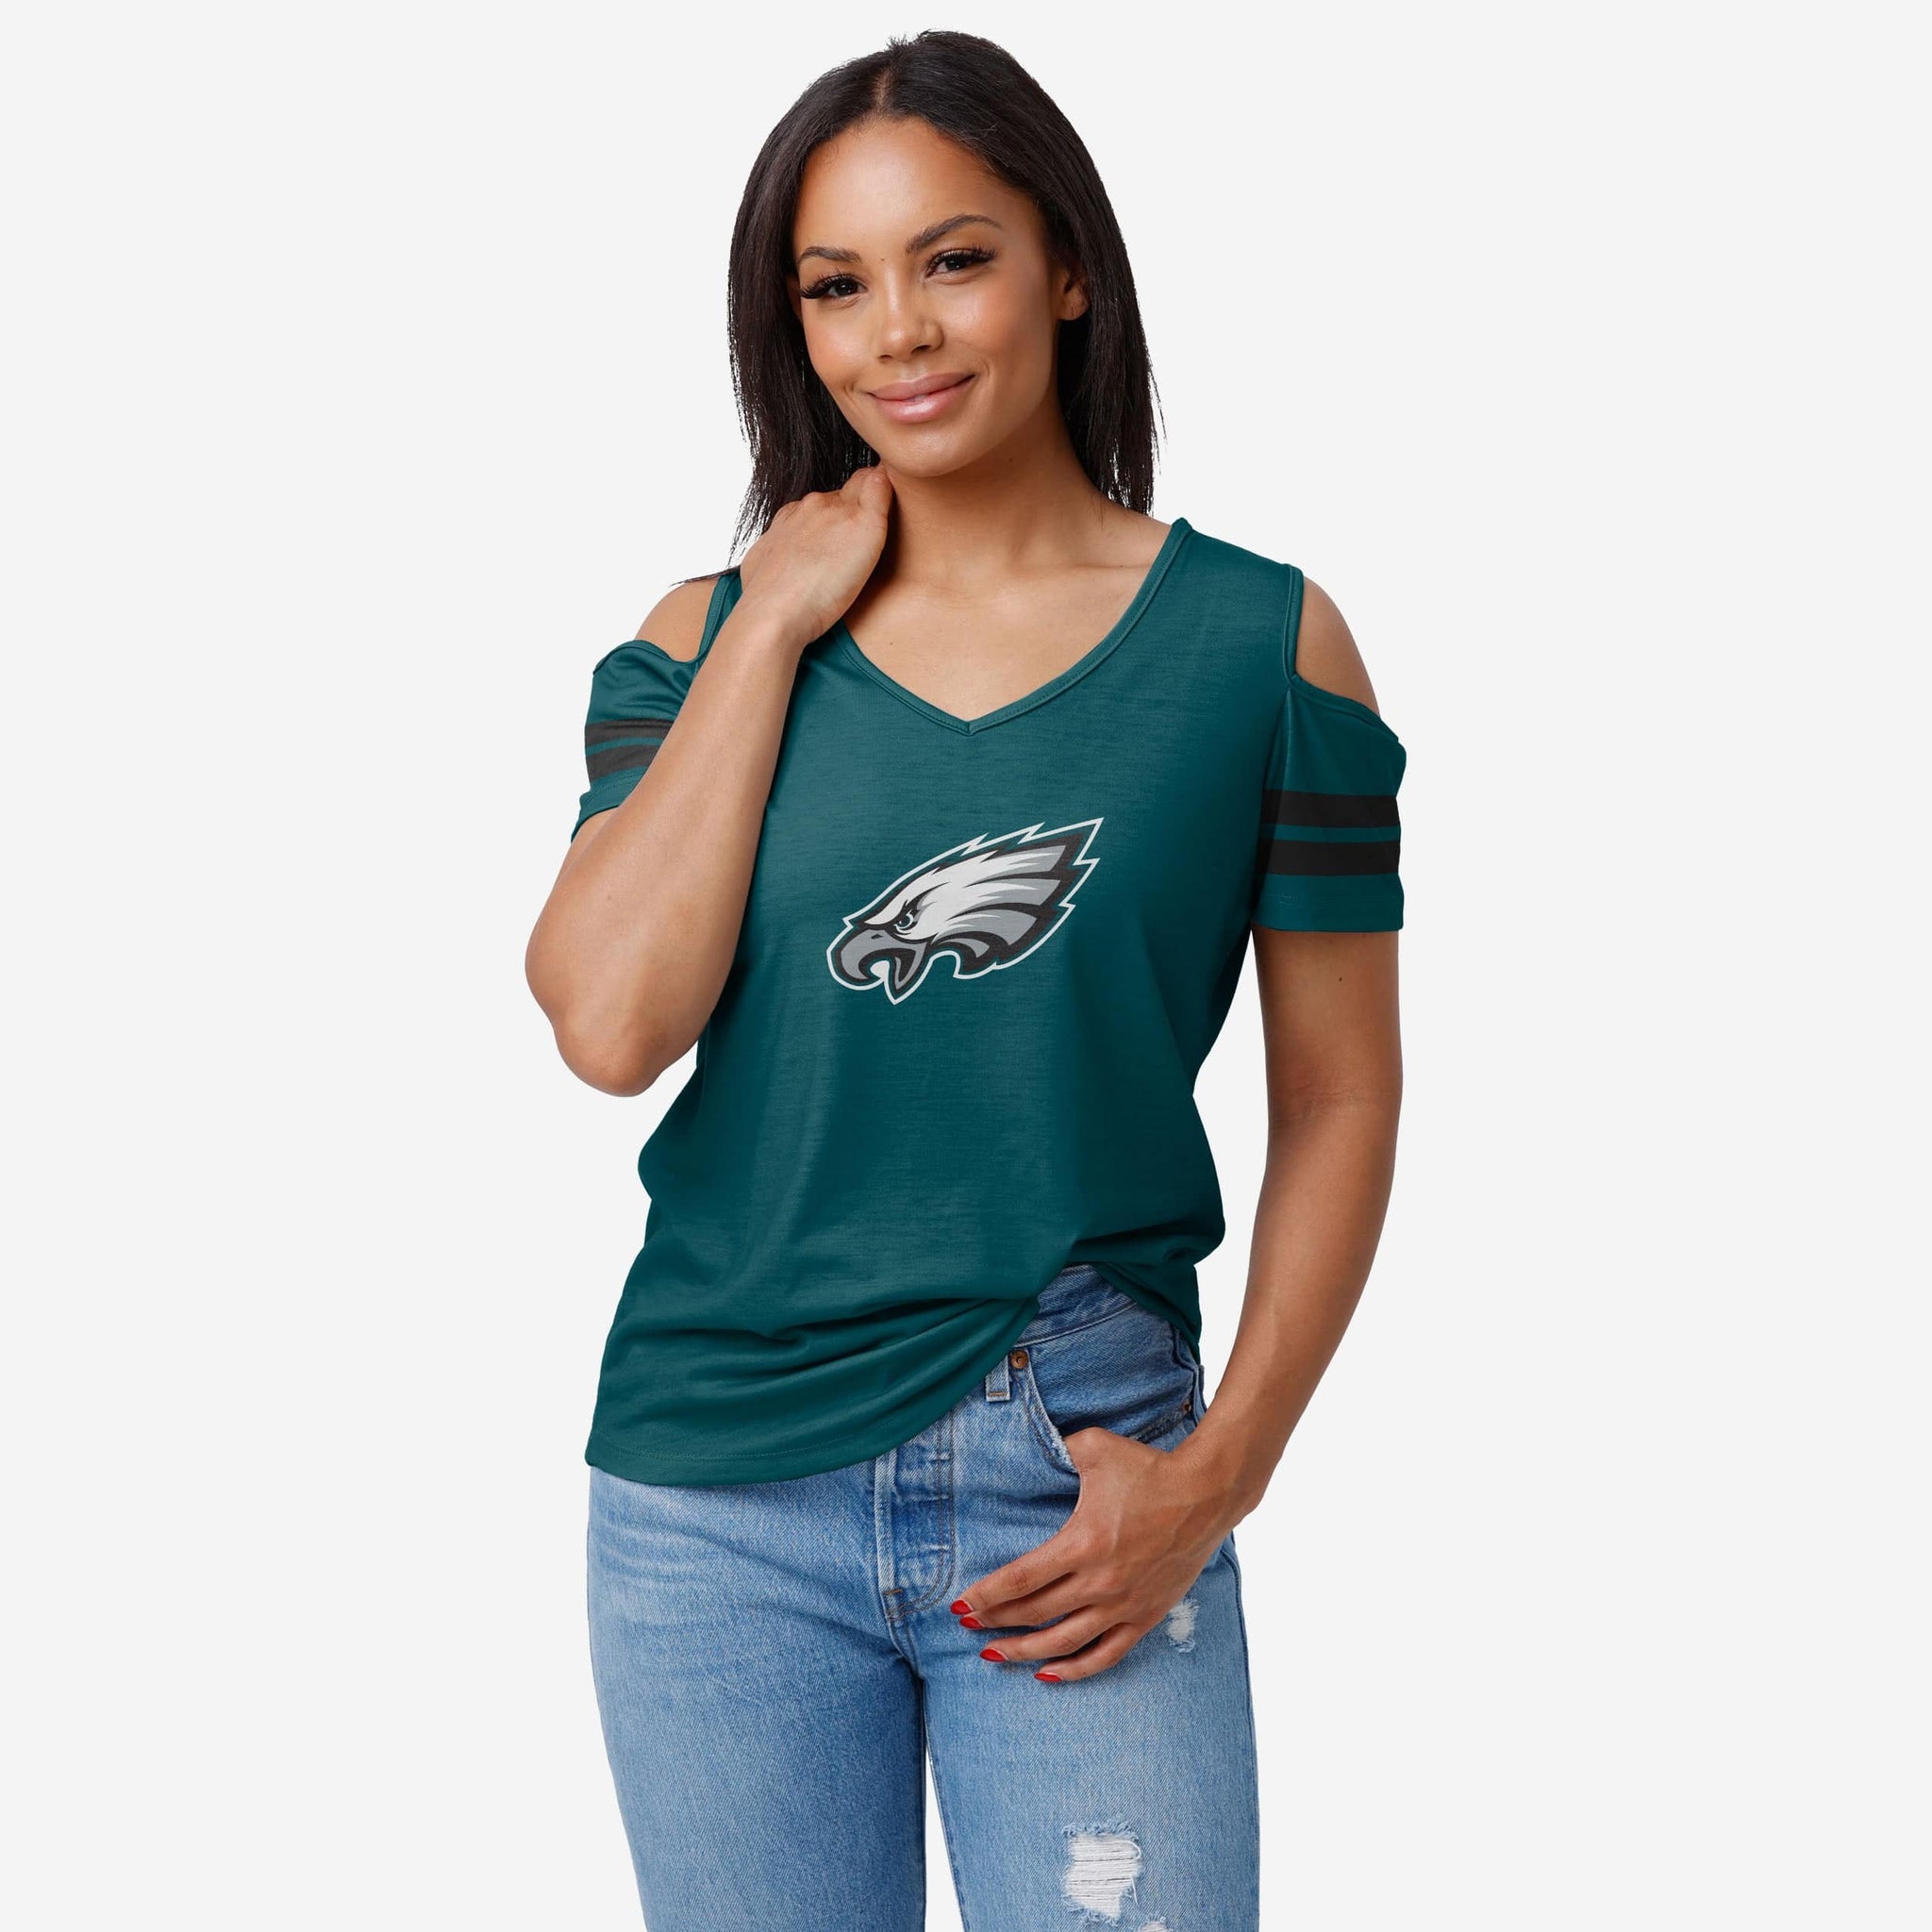 Philadelphia Eagles Women's Apparel, Eagles Ladies Jerseys, Gifts for her,  Clothing